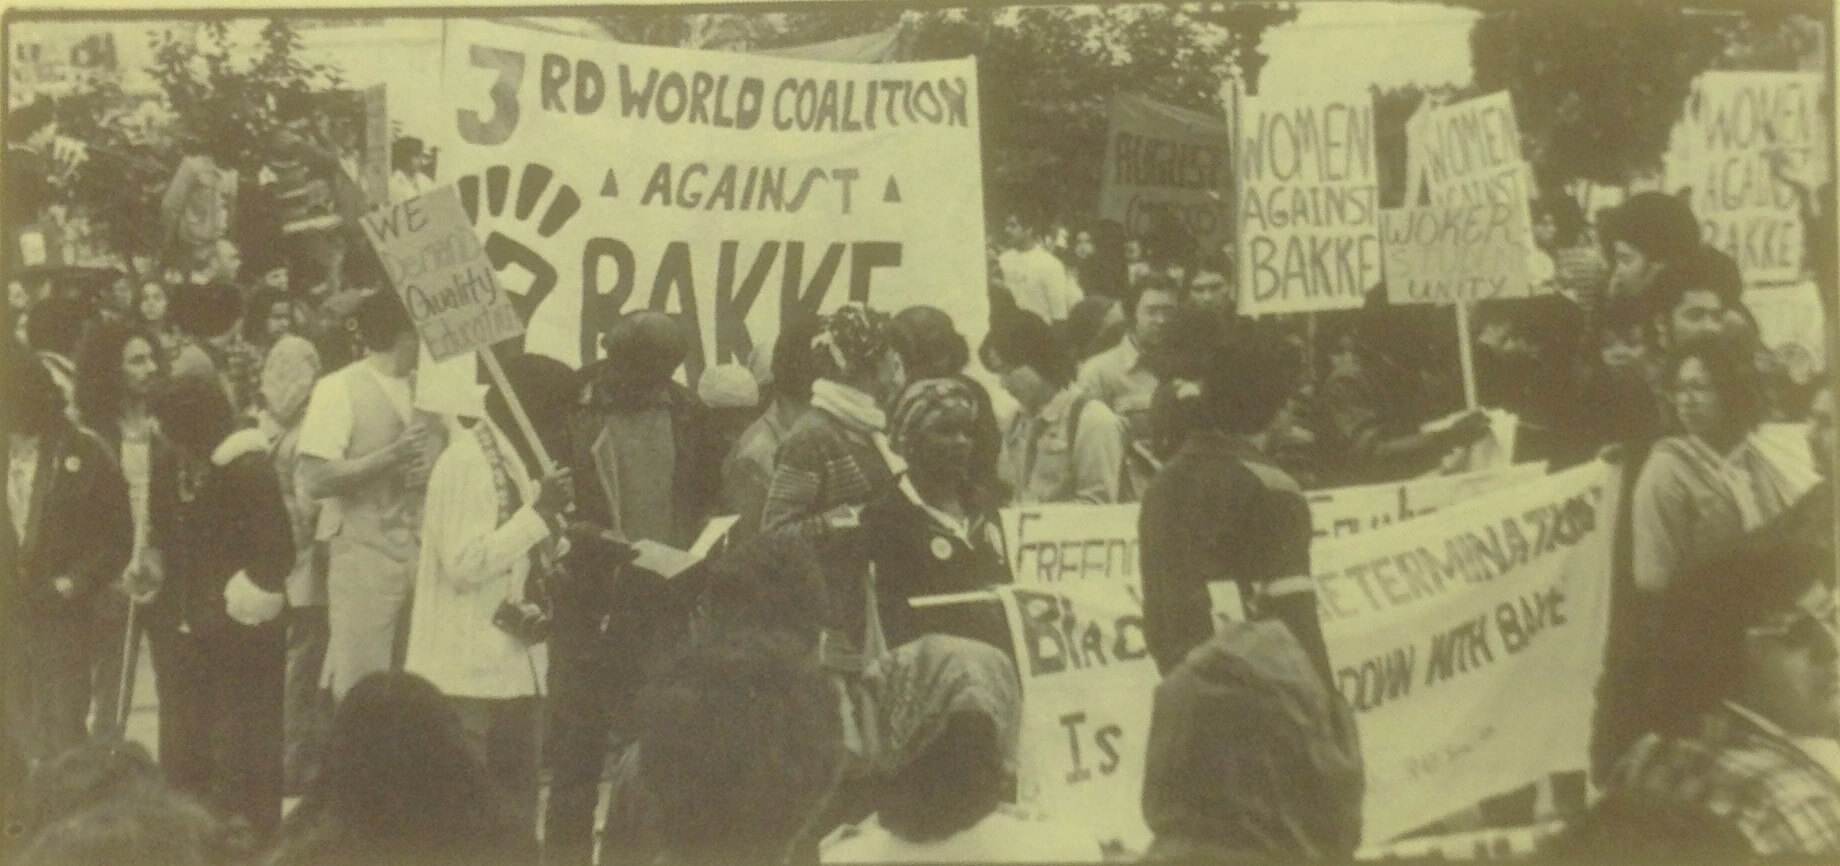 A crowd of protestors holding signs to denounce Bakke. Some signs read "we deserve quality education" and "women against Bakke."